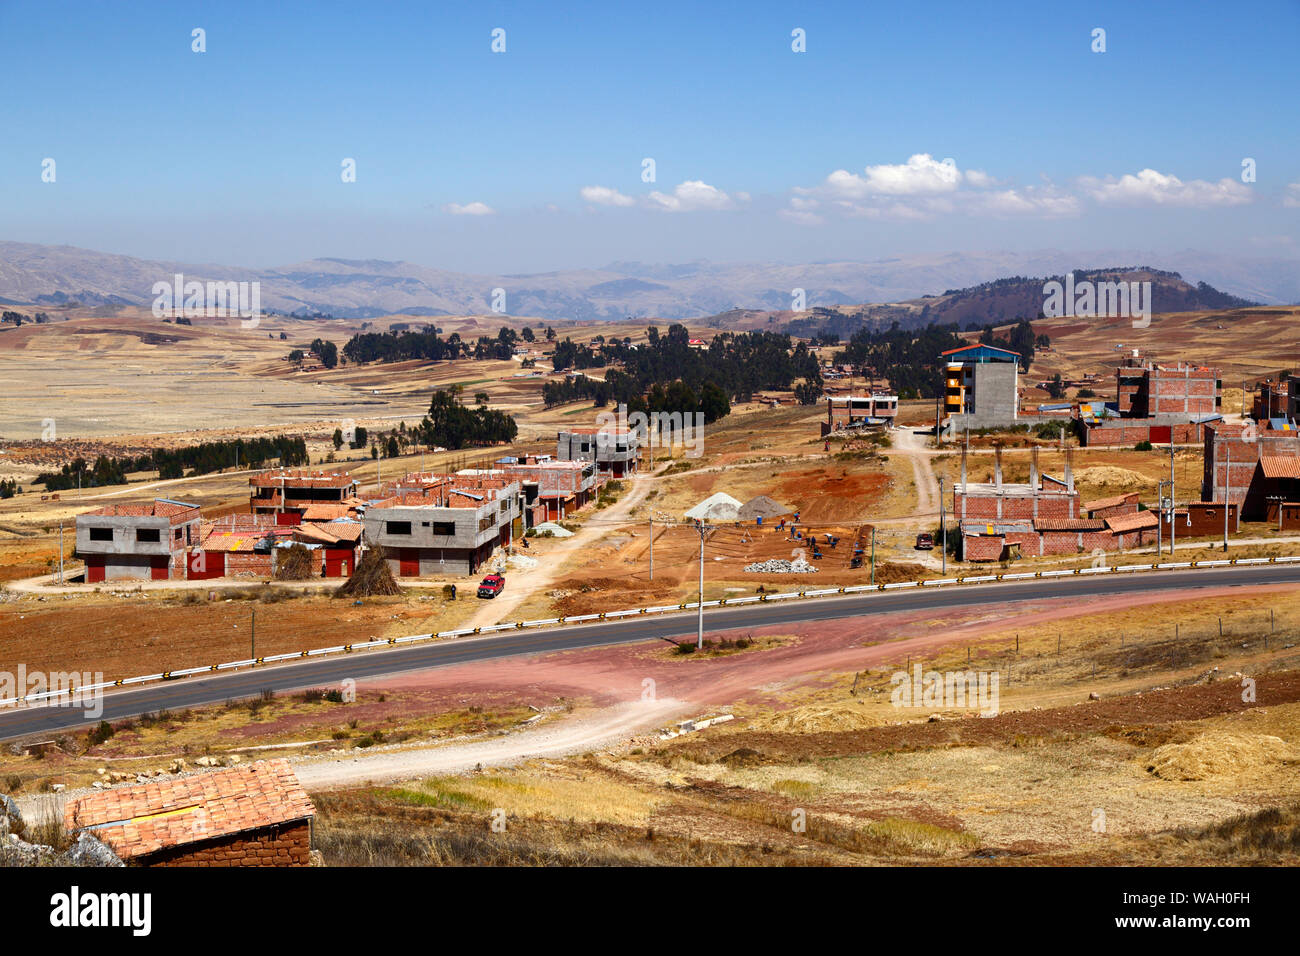 Buildings under construction at Nuevo Chinchero, near the original village of Chinchero, financed by compensation for land bought by the government from familiies for the construction of a new airport for Cusco and Machu Picchu, Cusco Region, Peru Stock Photo